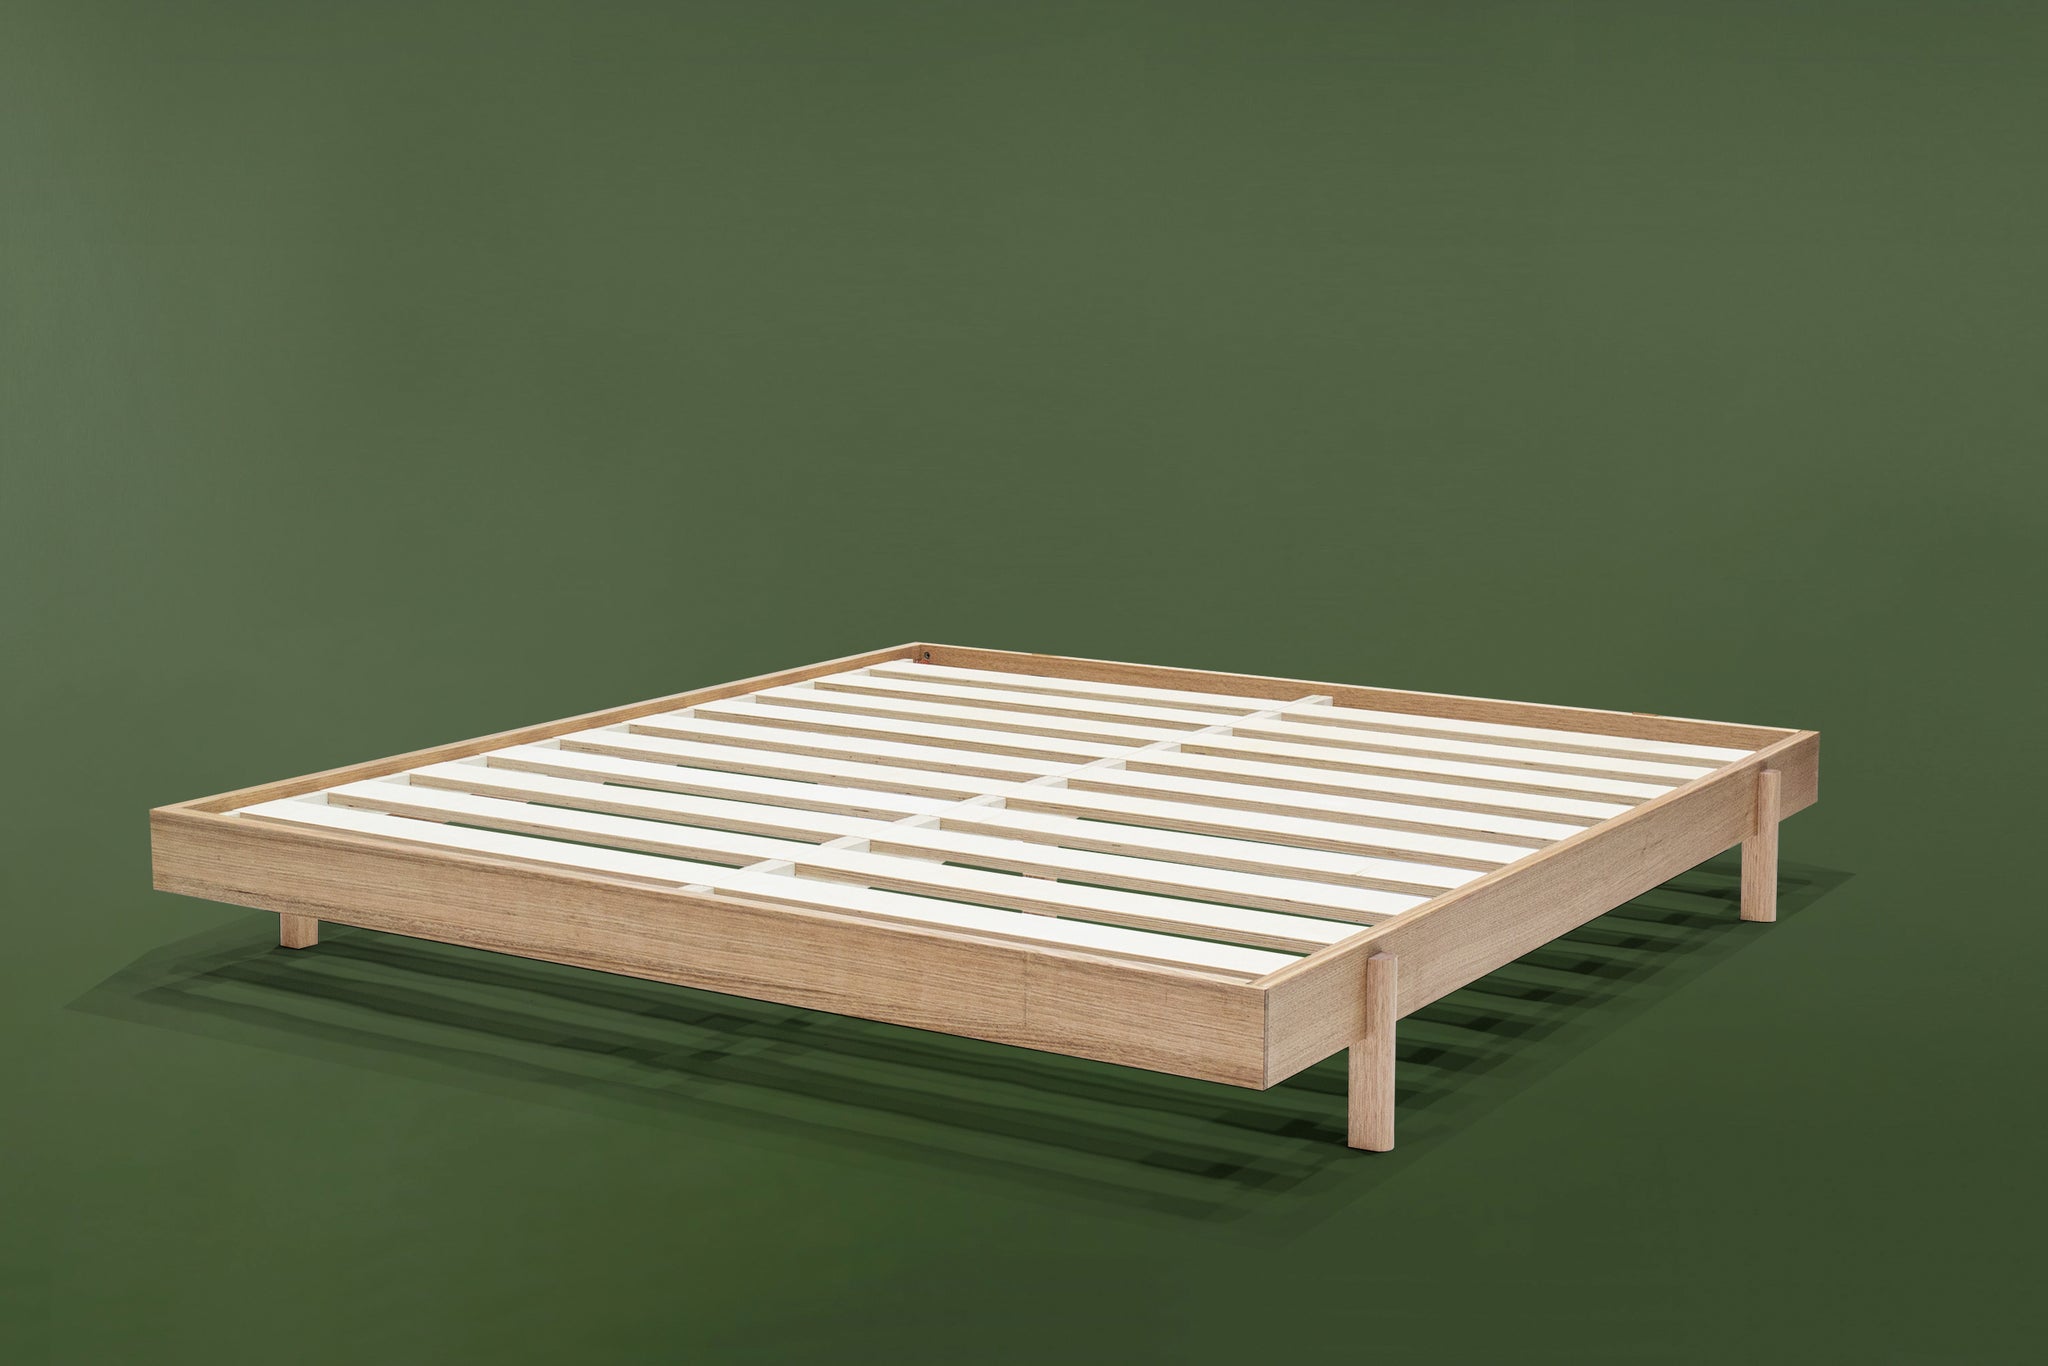 The Bed Frame